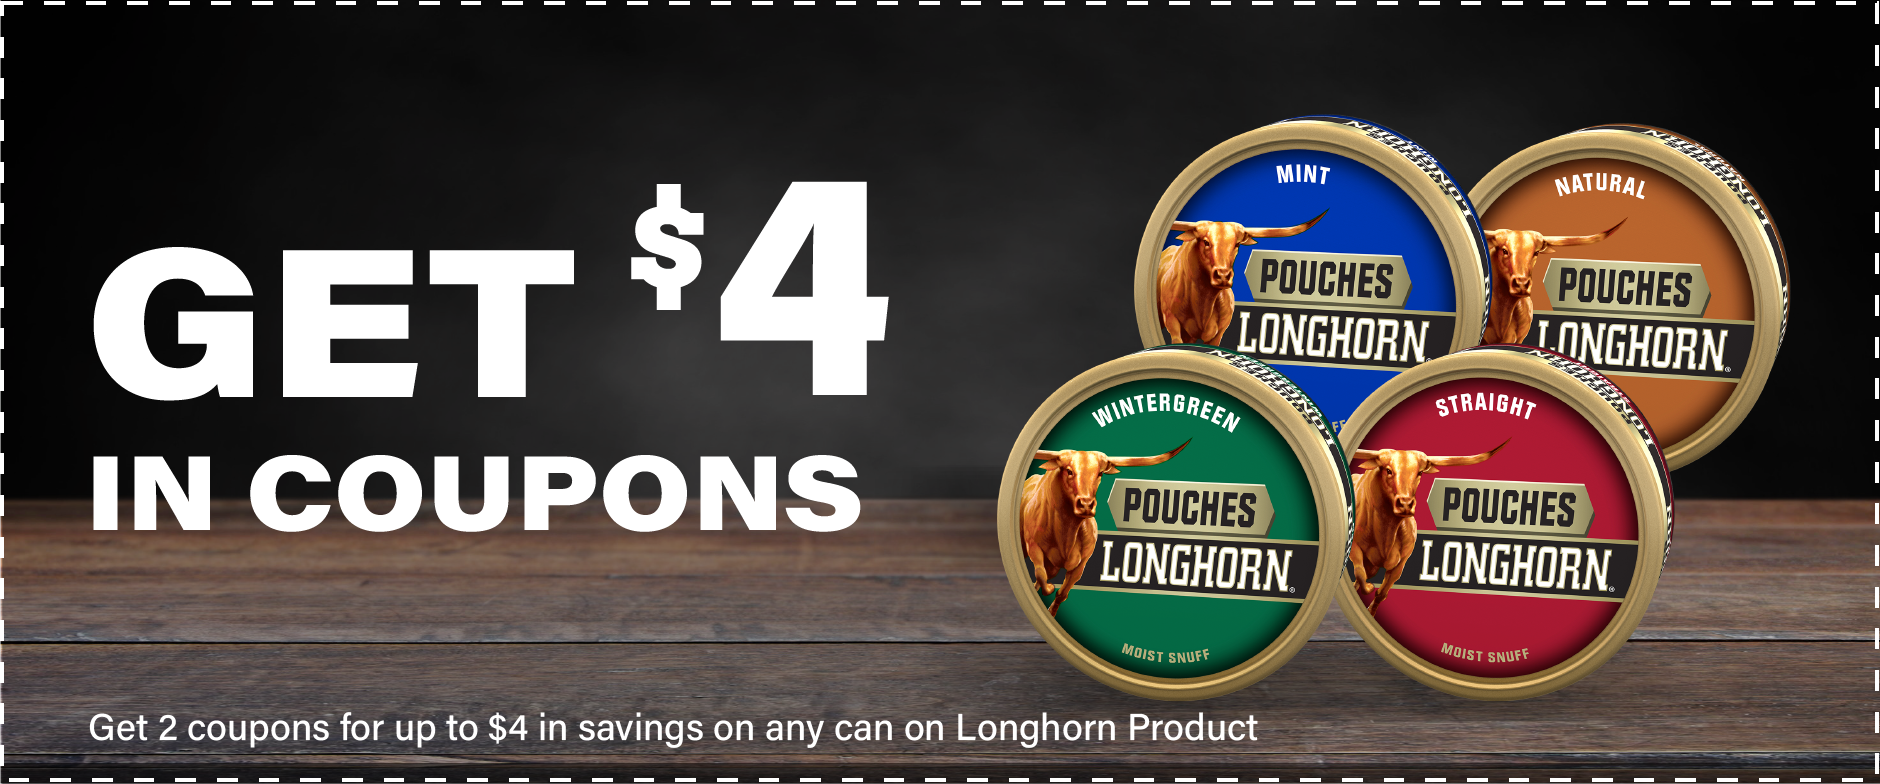 Longhorn Tobacco Coupons